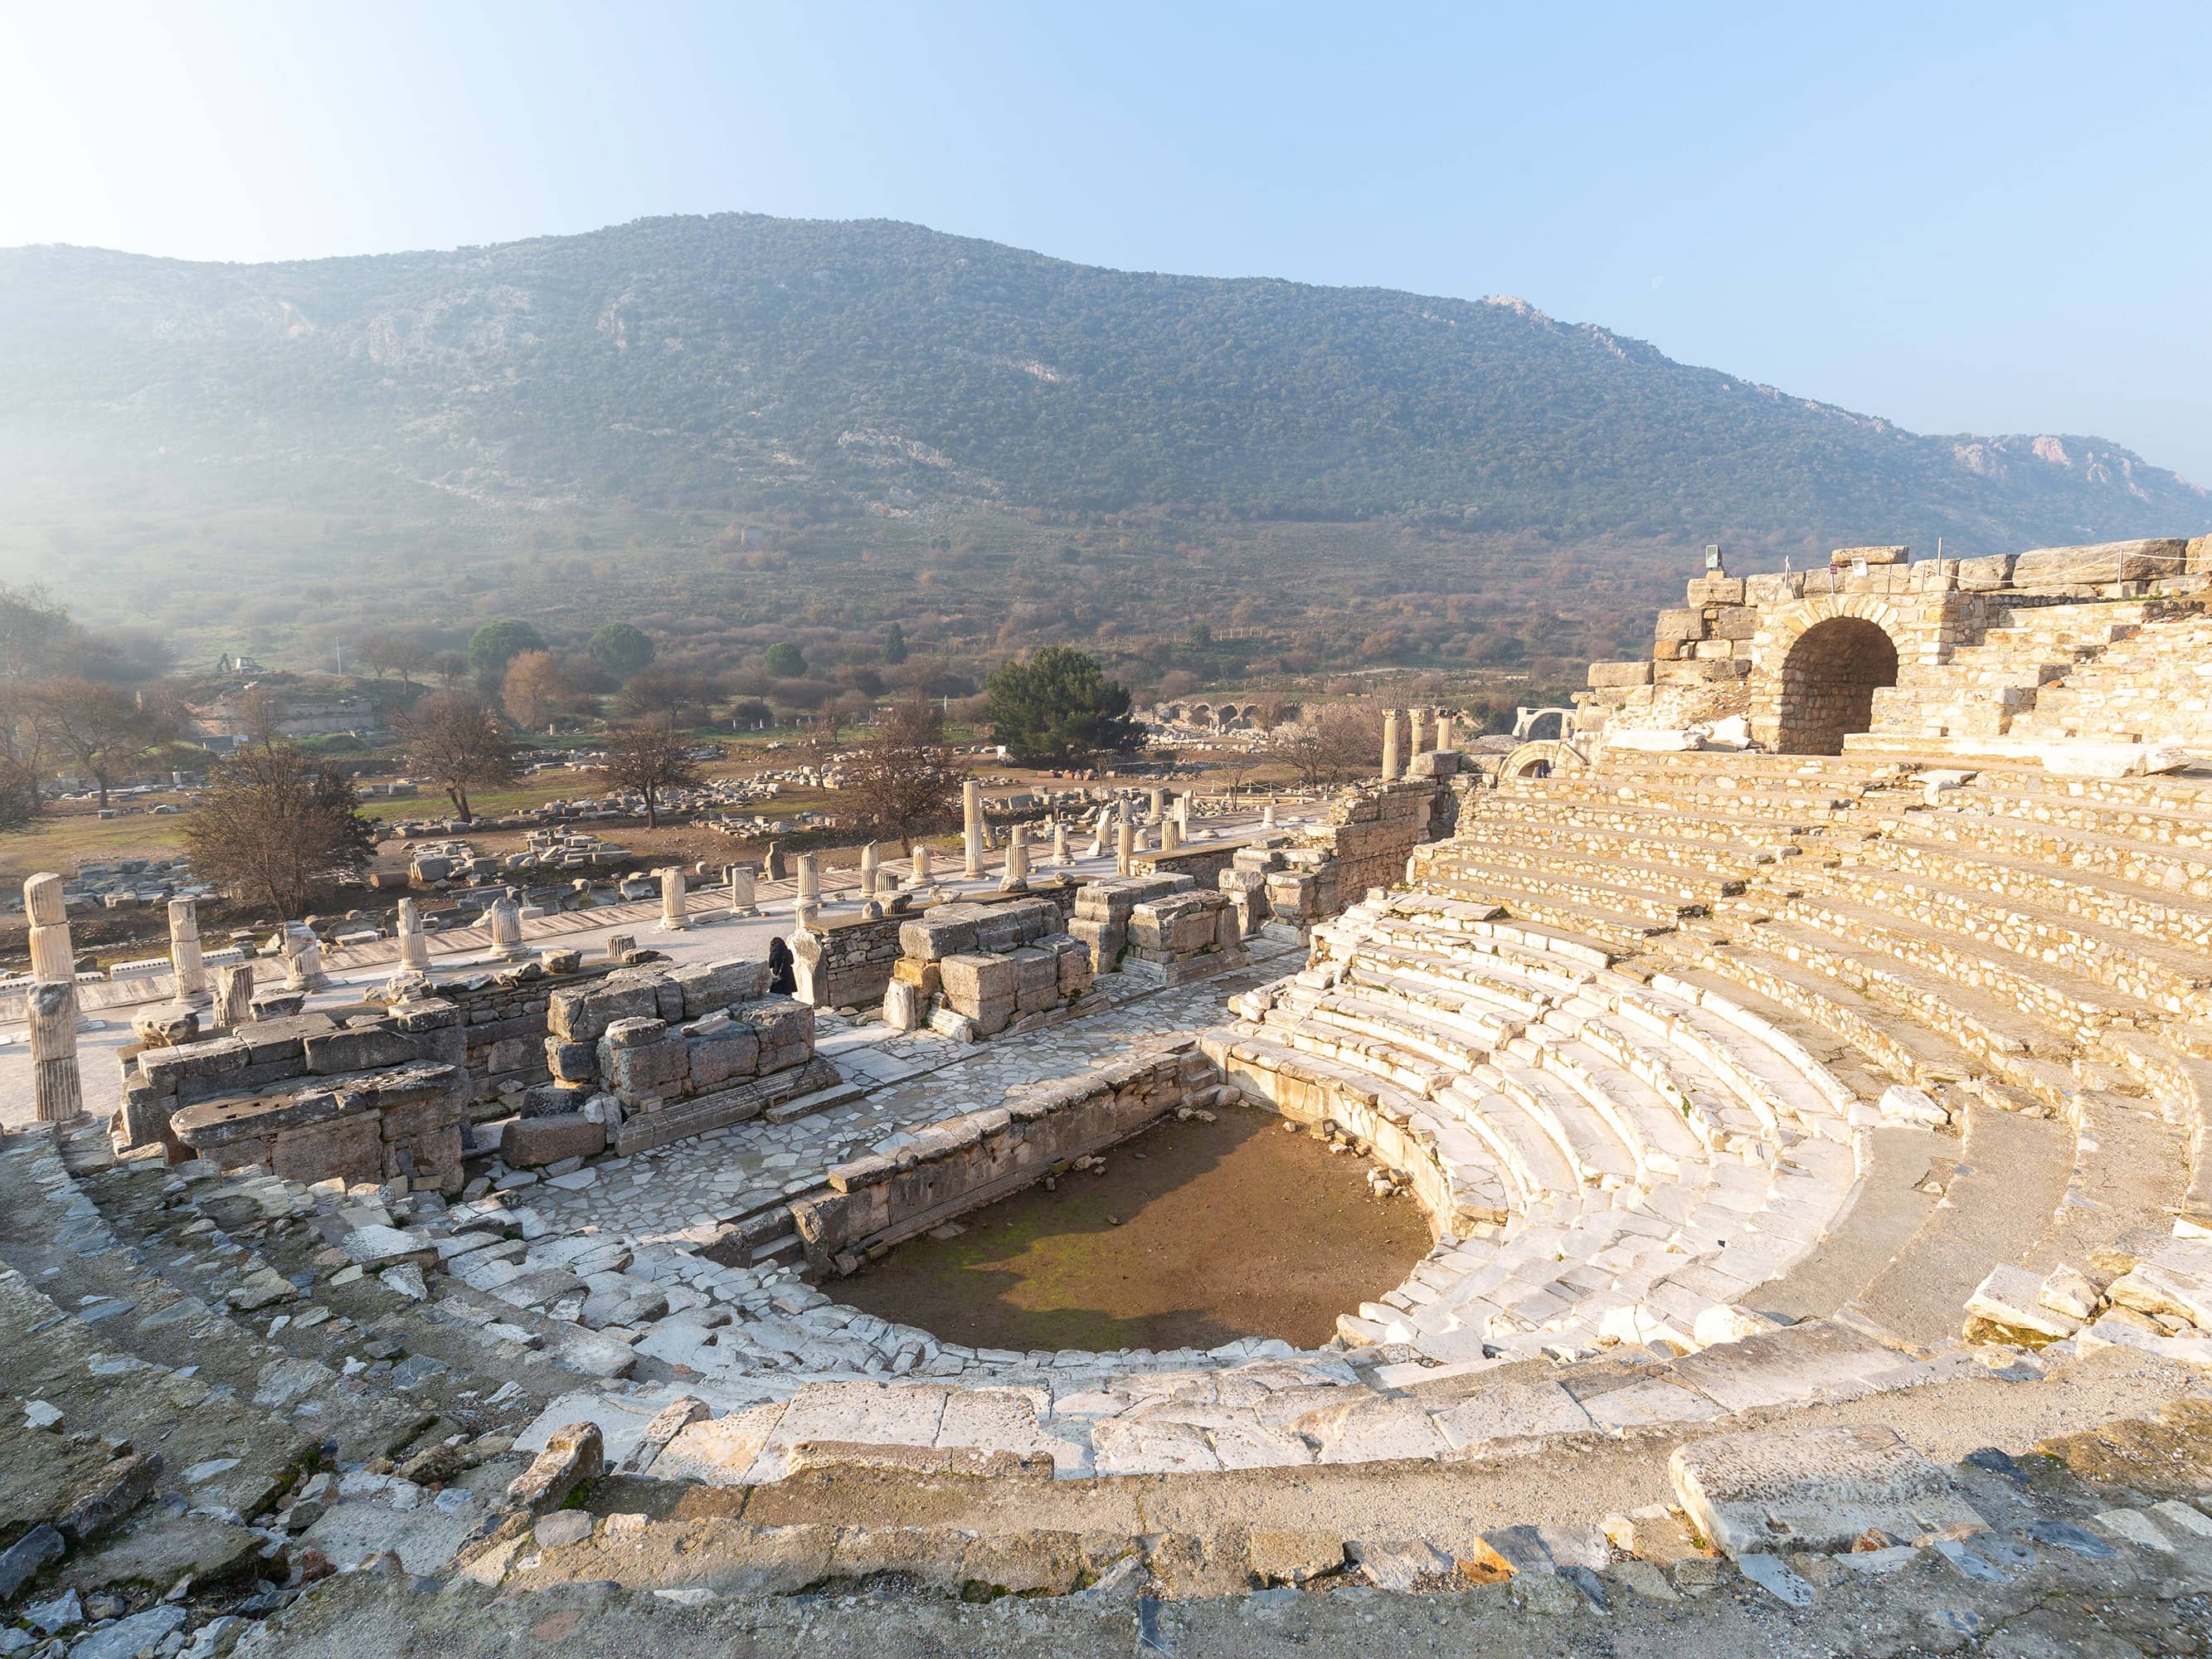  Take a day trip to Ephesus by private jet  